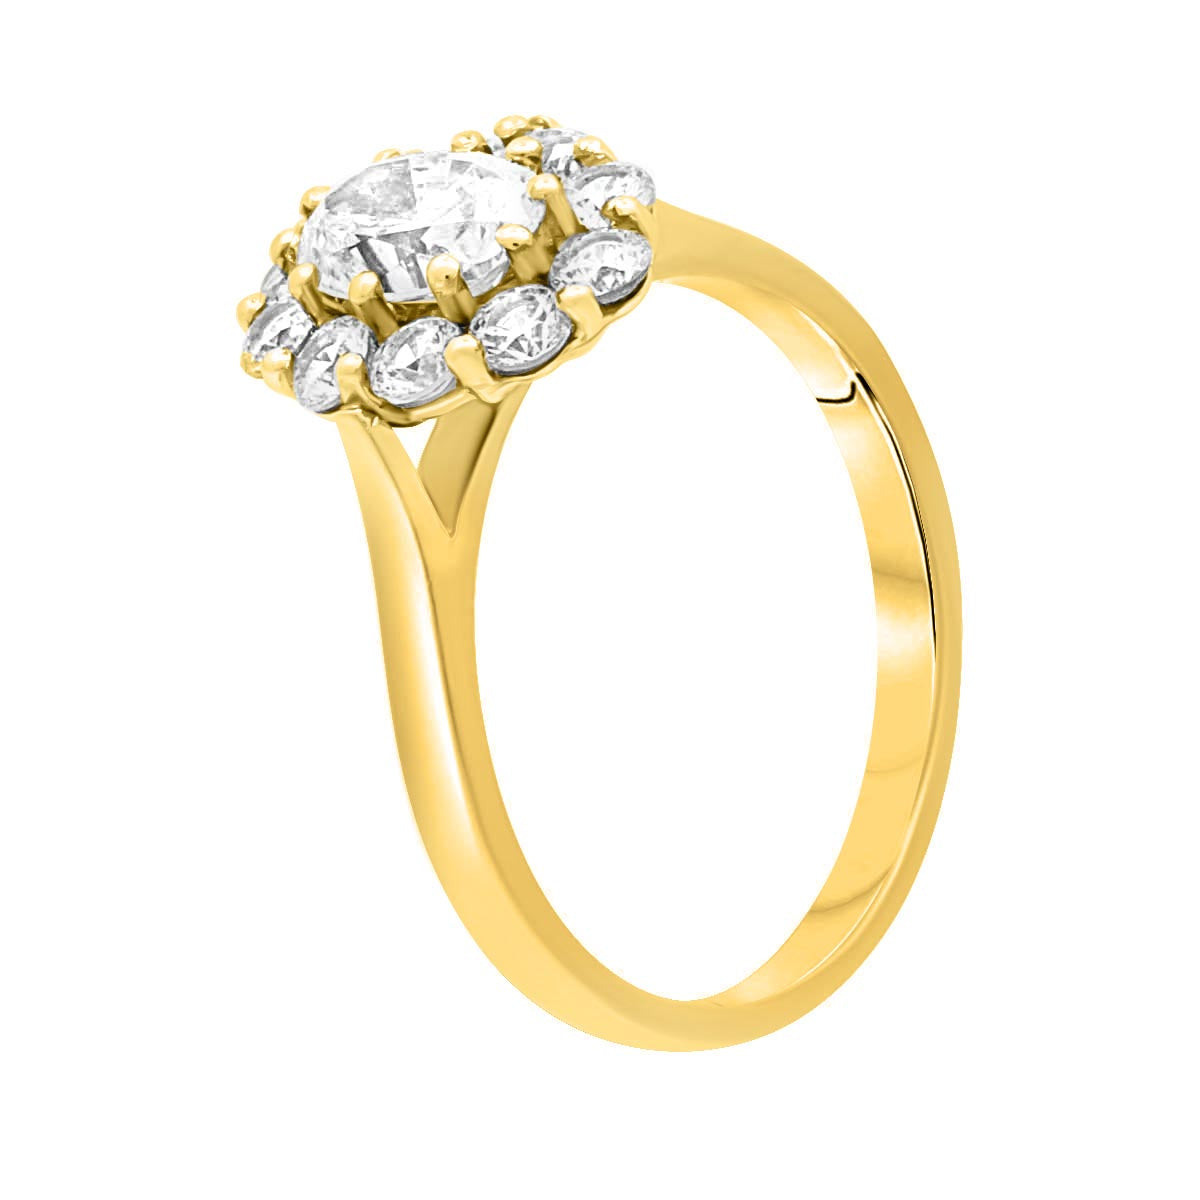 Cluster Engagement Ring in yellow gold in an angled view